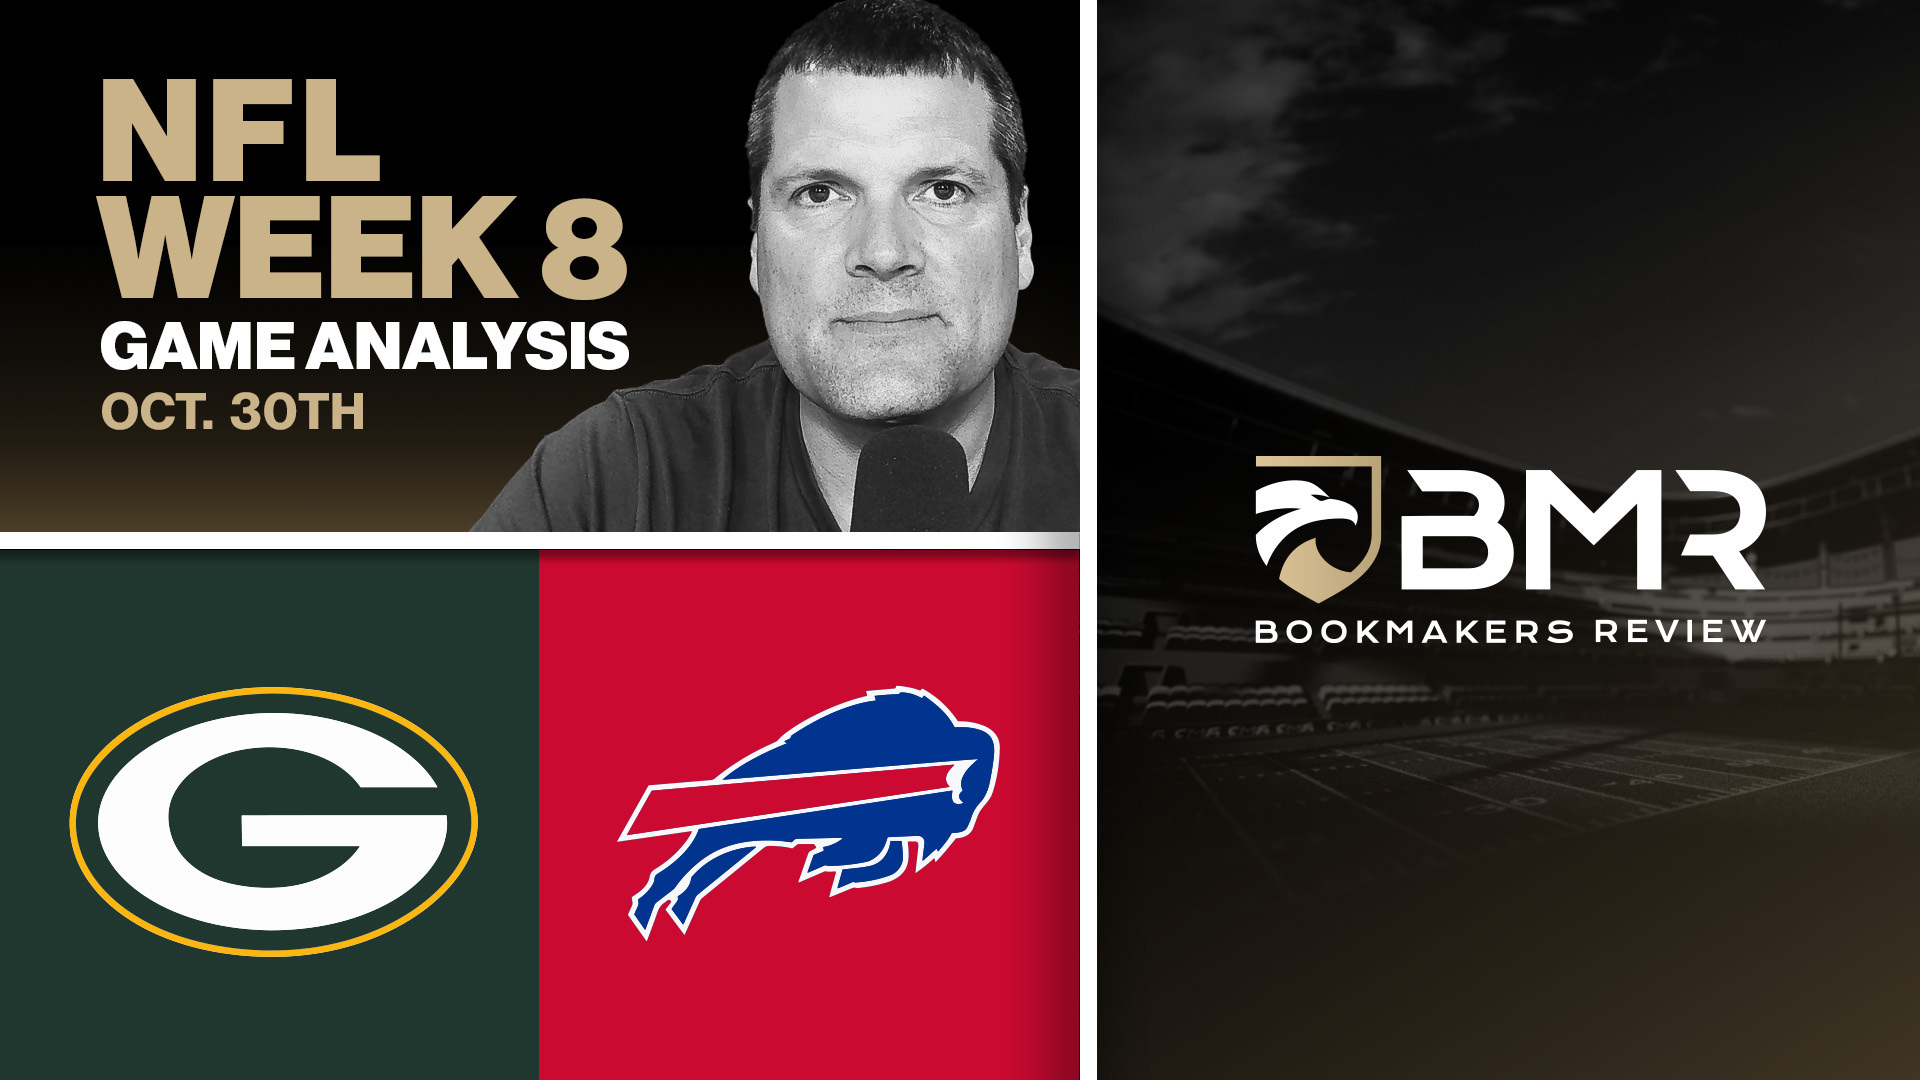 Packers vs. Bills &#8211; NFL Week 8 Pick by Donnie RightSide (Oct. 30th)